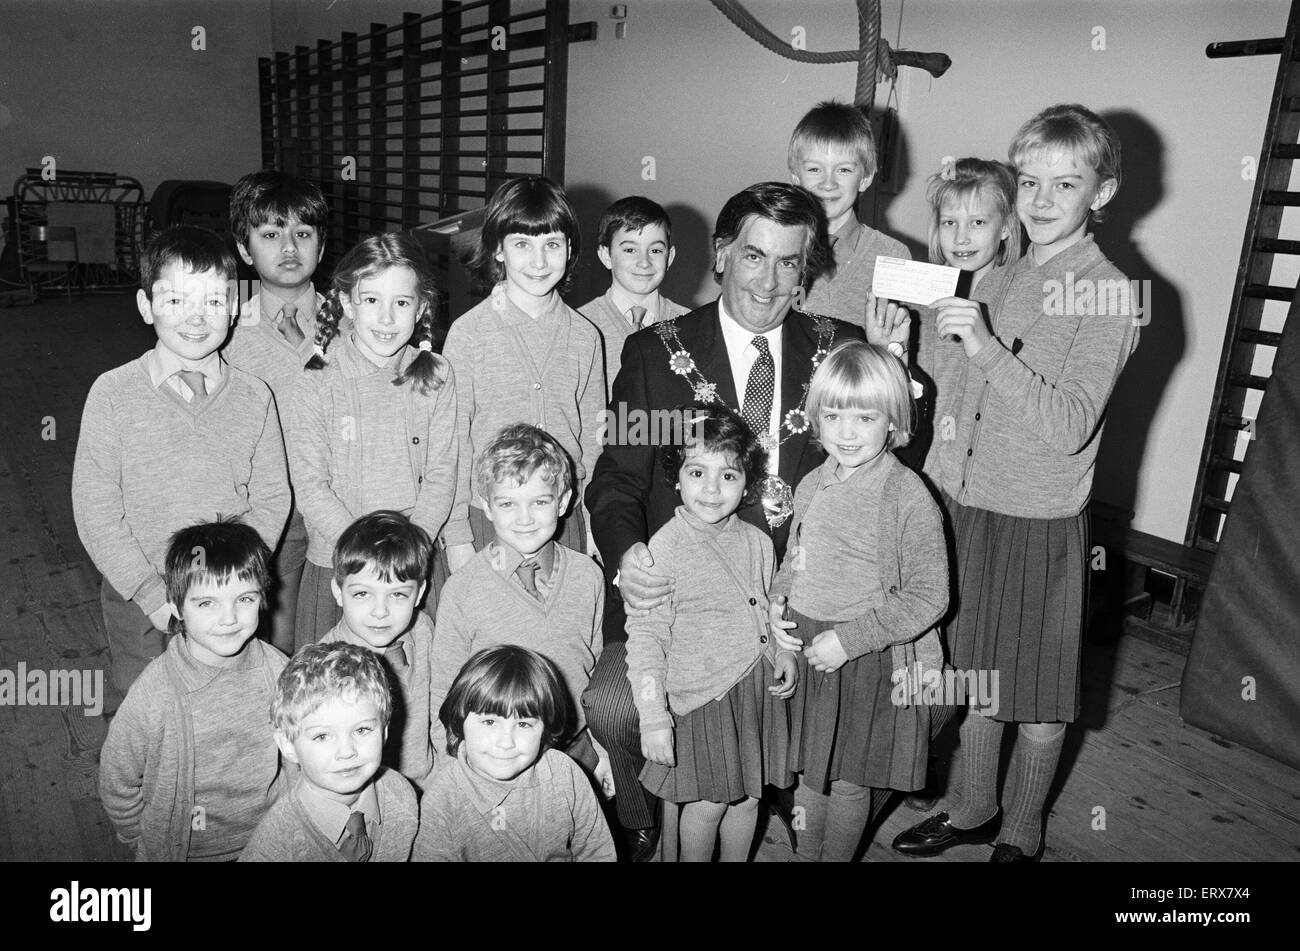 Pupils from Mount School Edgerton, who have raised 160 pounds for the Kirklees Mayor's local Children in Need appeal, pictured with Mayor Clr John Holt. 18th January 1989. Stock Photo